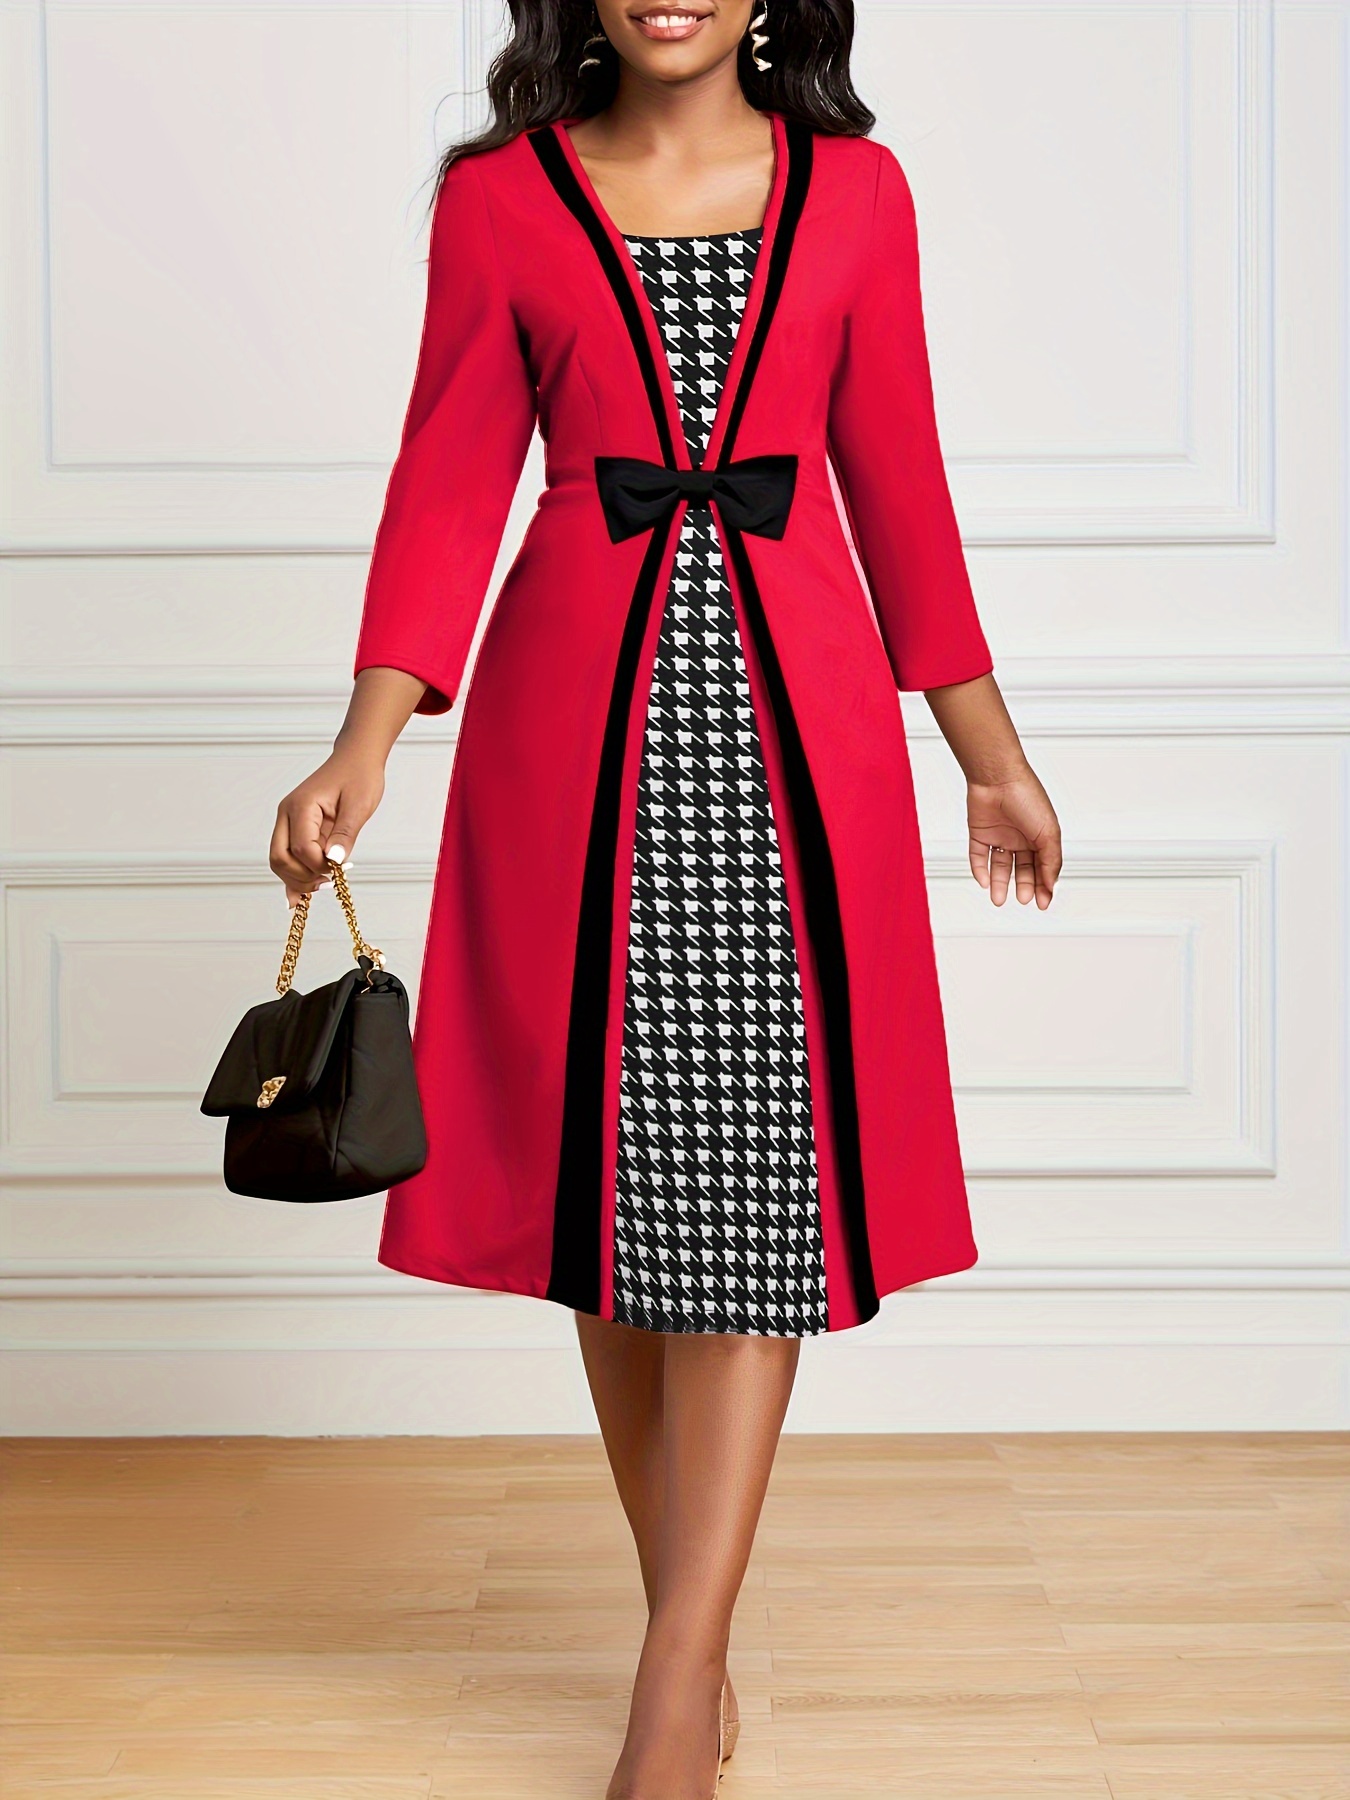 Houndstooth Print A-line Dress for Sale Australia, New Collection Online